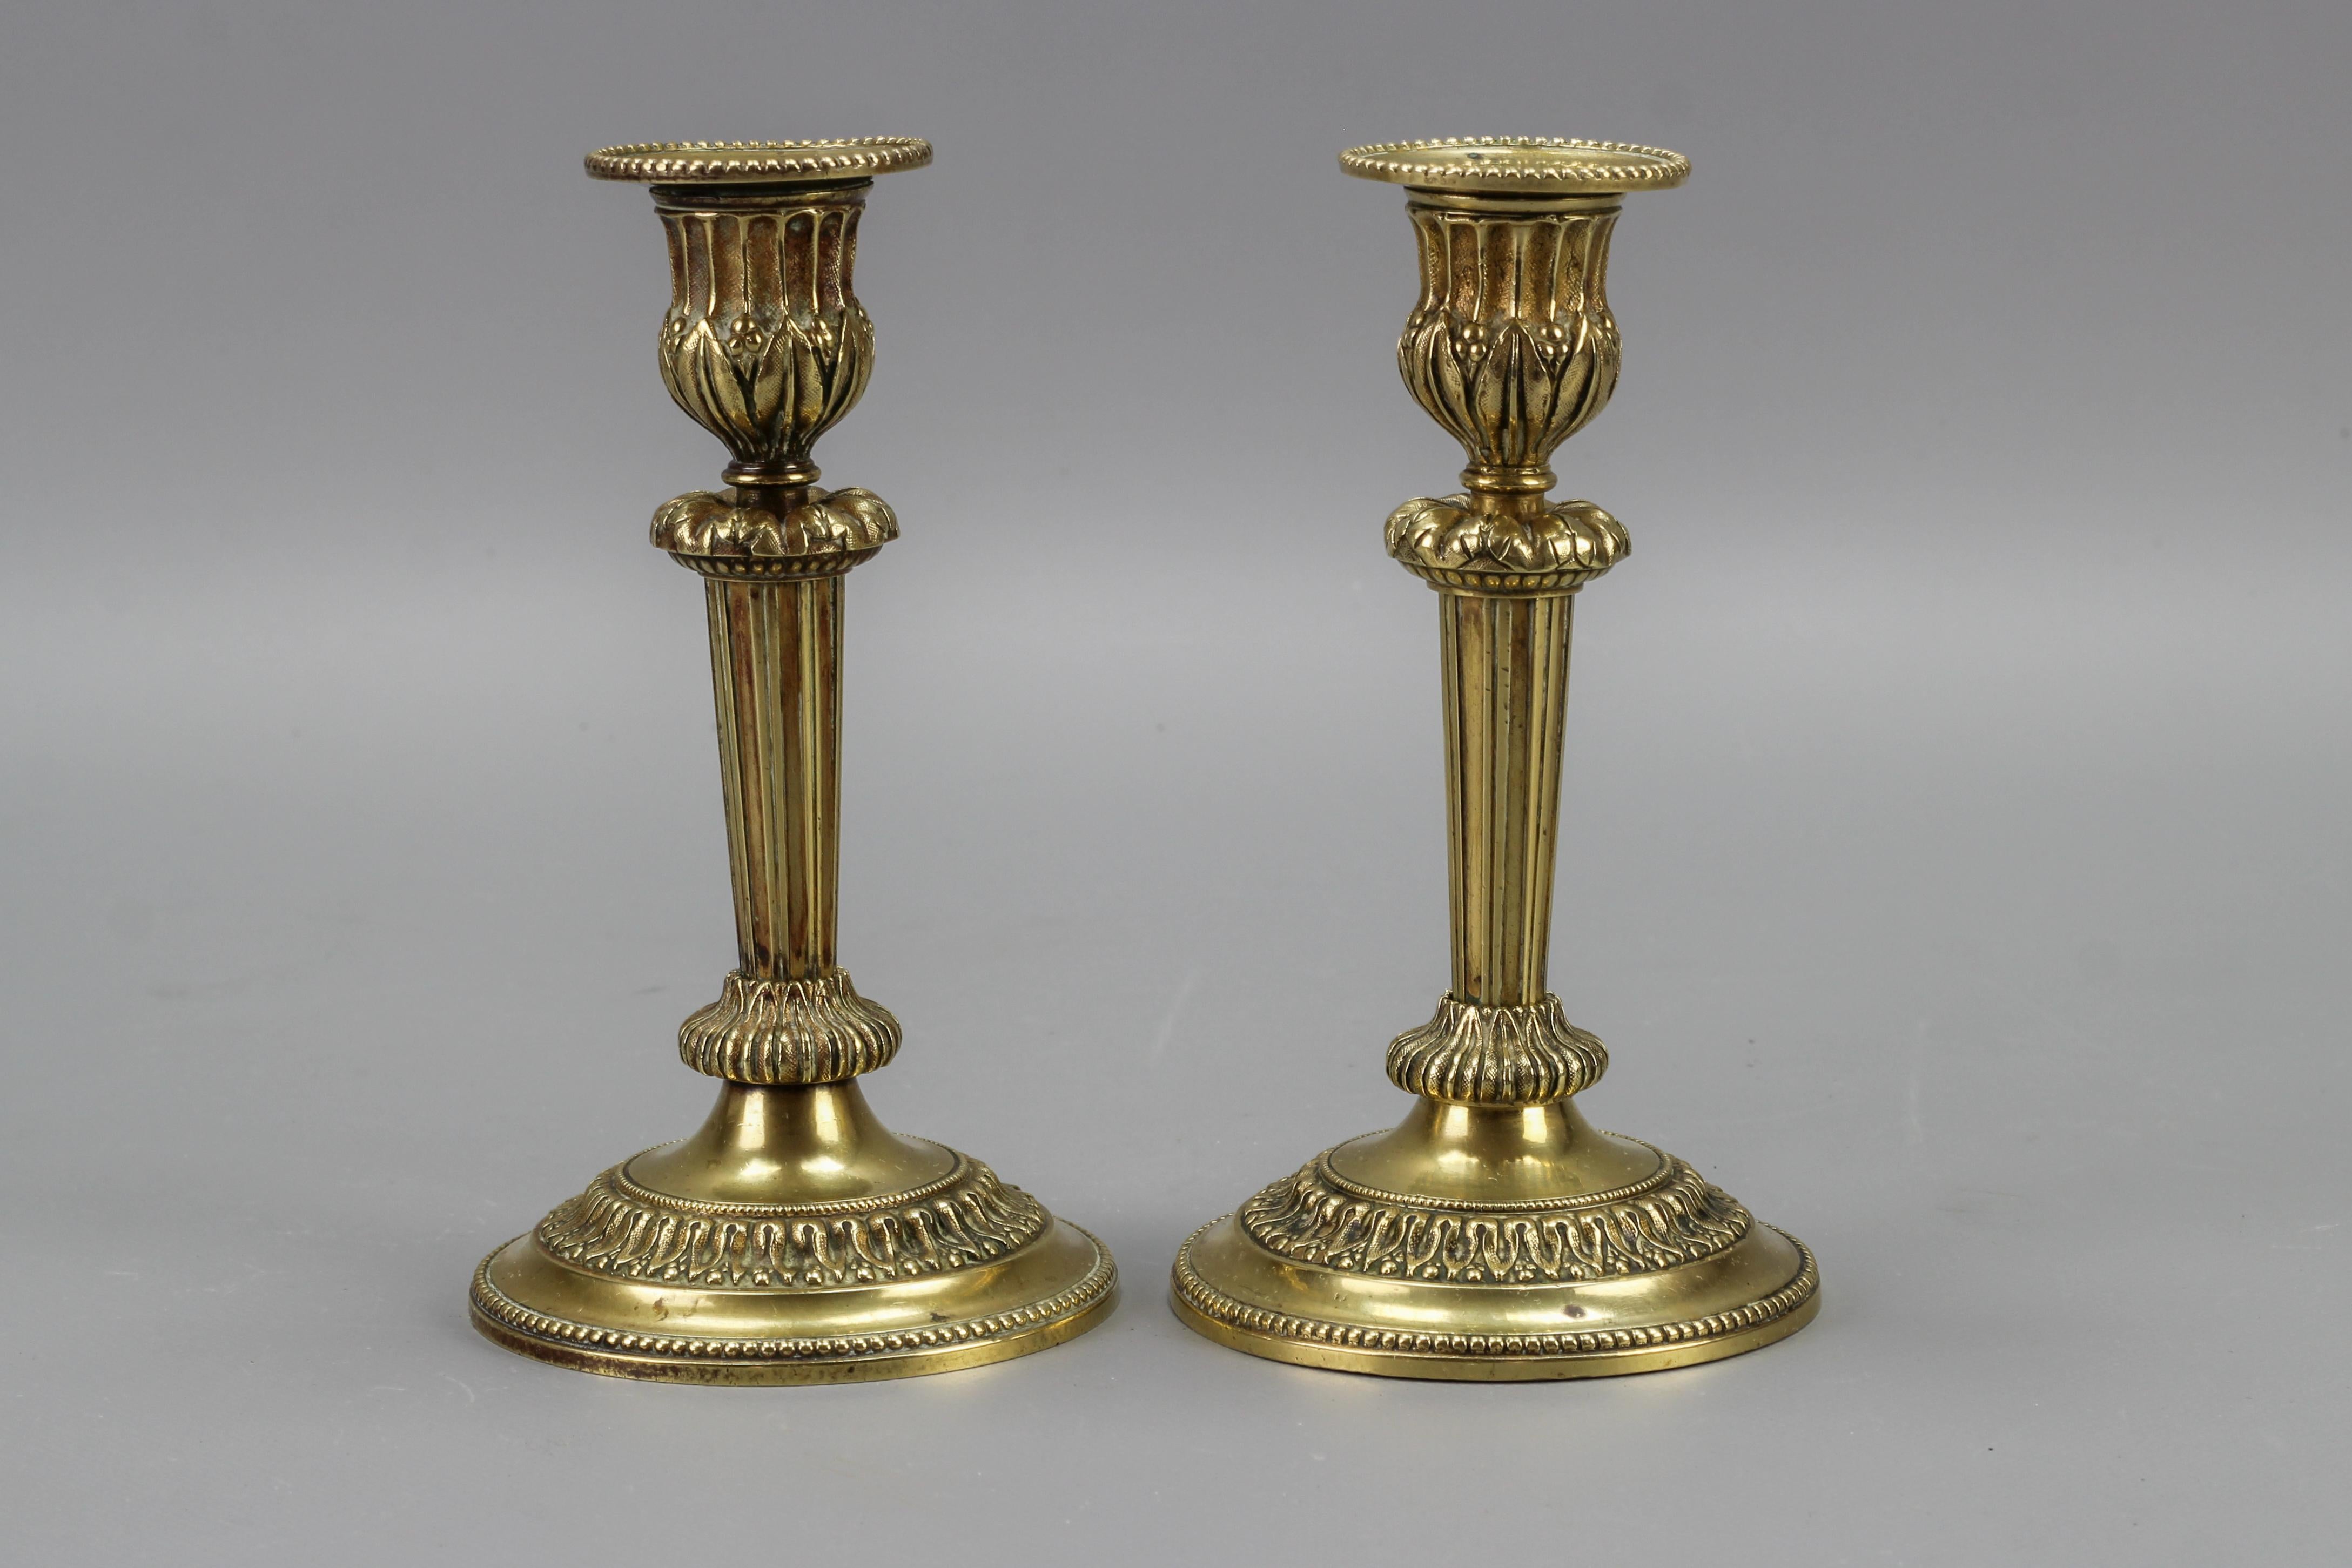 An elegant pair of French Louis XVI-style brass candlesticks or candle holders from the 1920s. Beautifully ornate with foliate motifs, these adorable and compact candleholders feature a tapering fluted shaft with an acanthus leaf footing, raised on